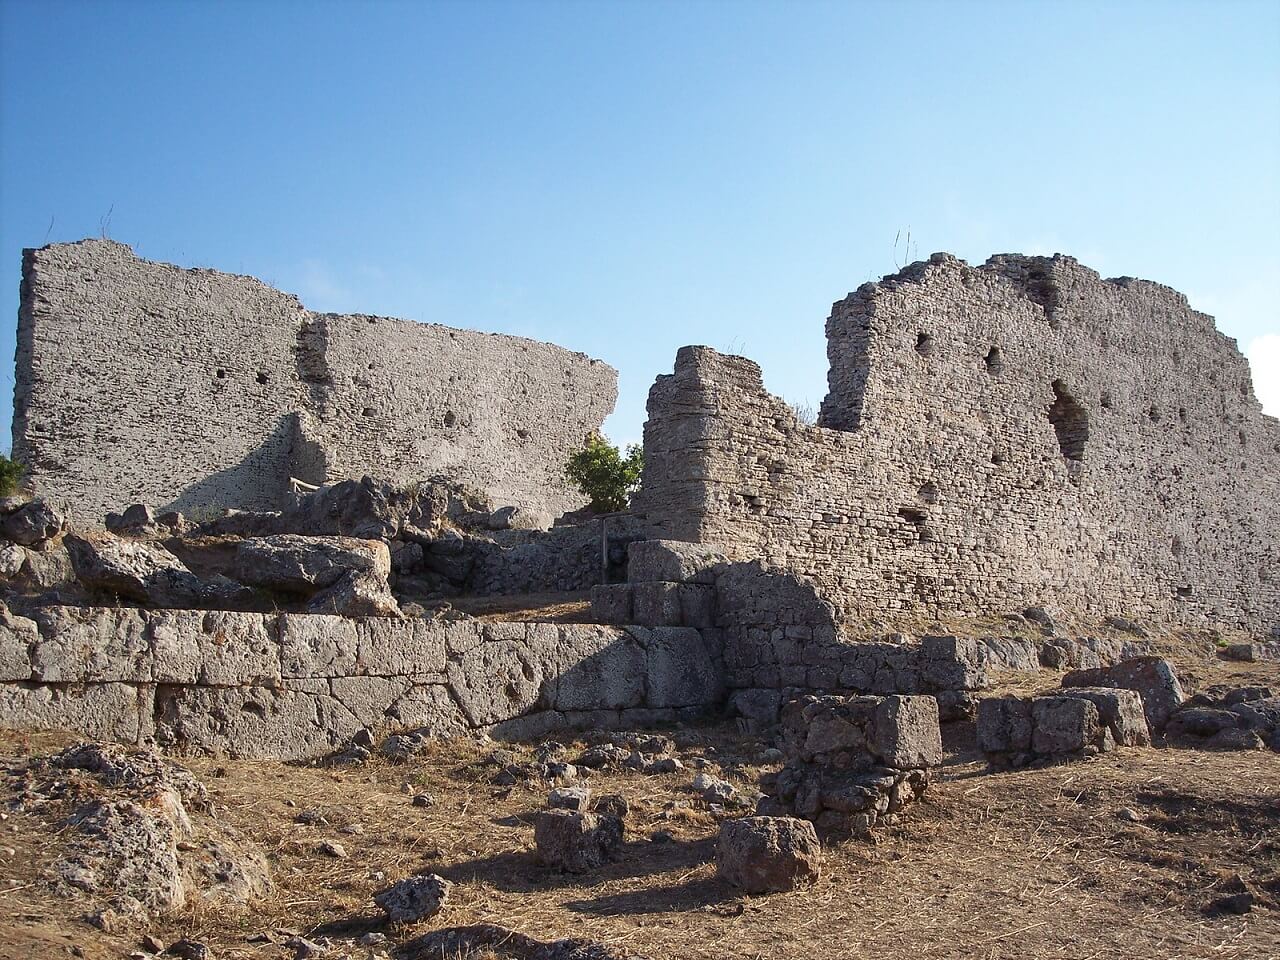 The ruins of the ancient town of Cosa, in Ansedonia (Orbetello)